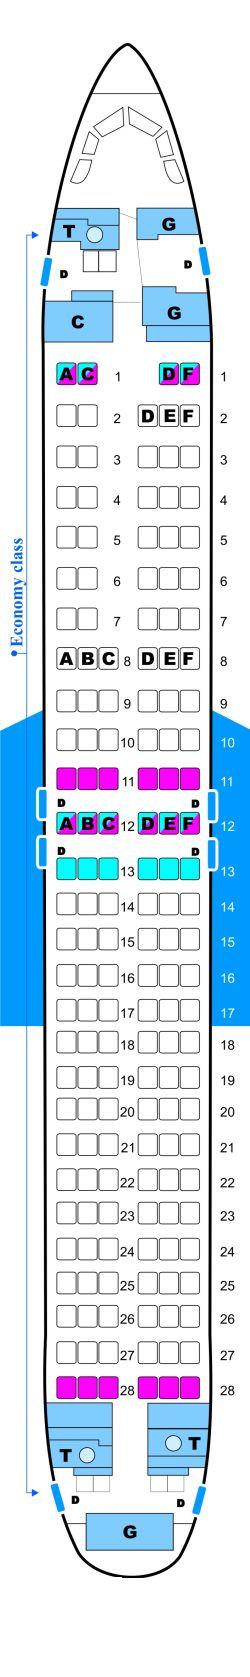 Seat map for Malev Hungarian Airlines Boeing B737 800NG Config. 1